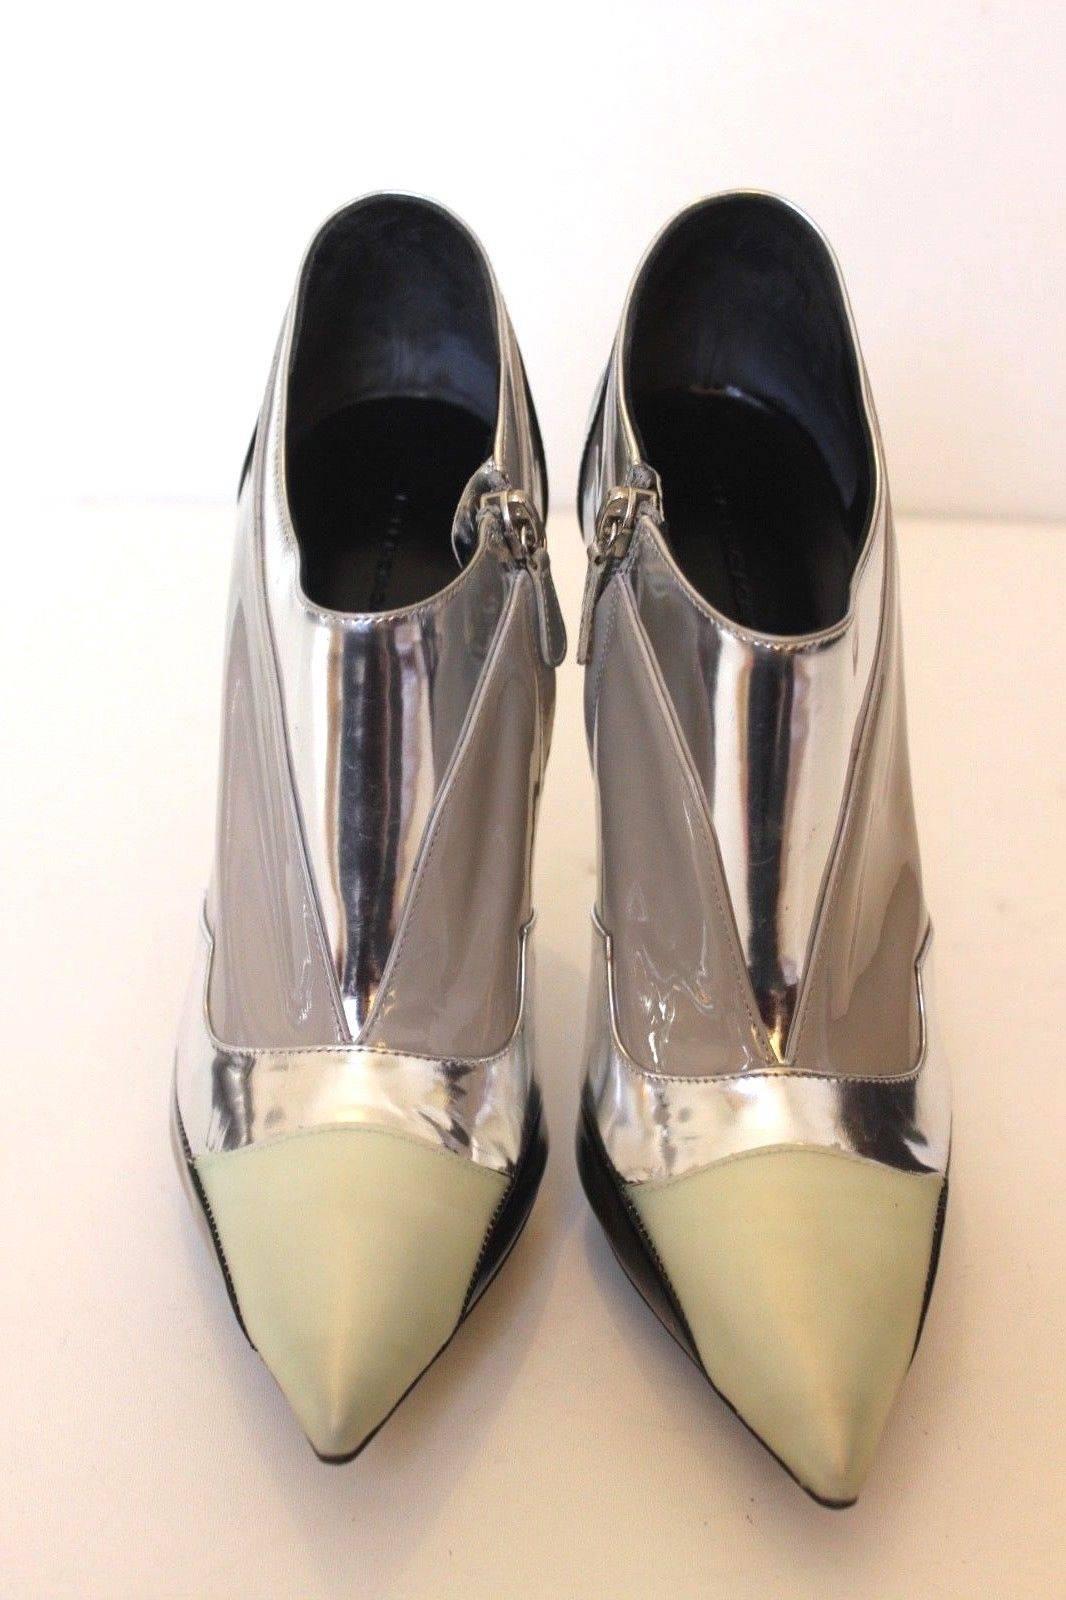 BALENCIAGA FW2008 Nicolas Ghesquière Silver Grey Ankle Boots 40 uk 7  In Excellent Condition For Sale In London, GB